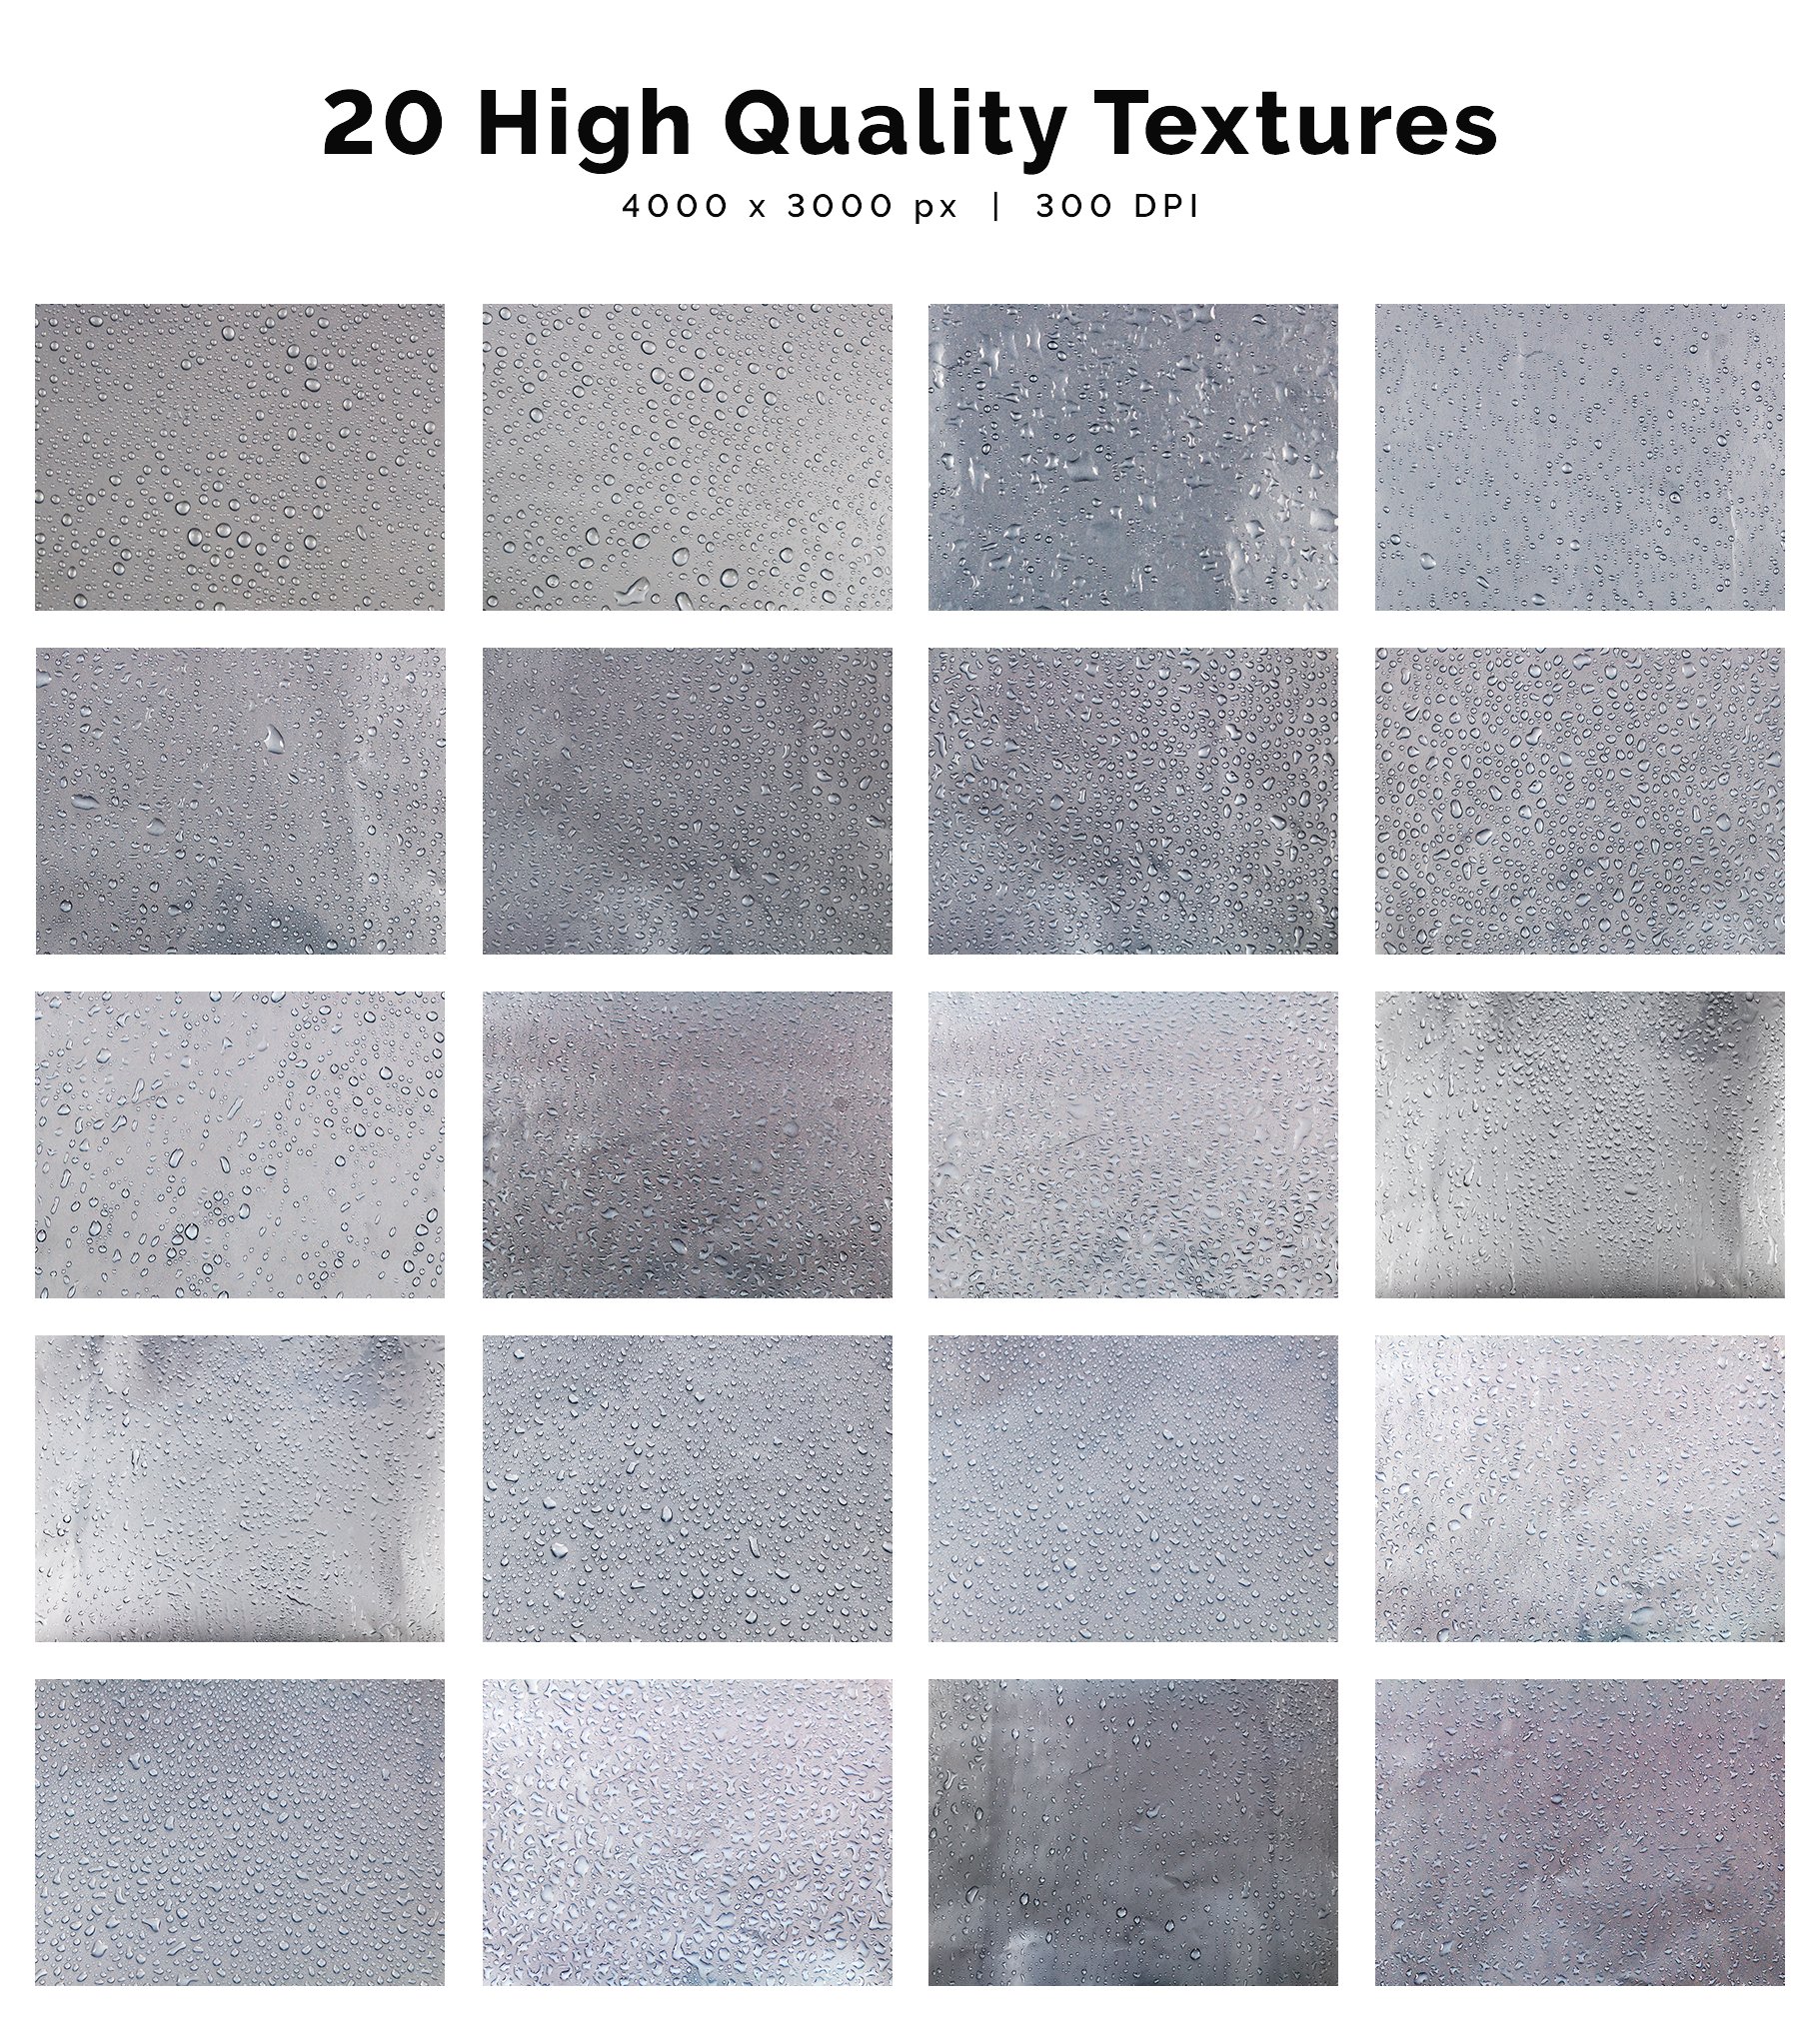 Here are 20 high quality textures.